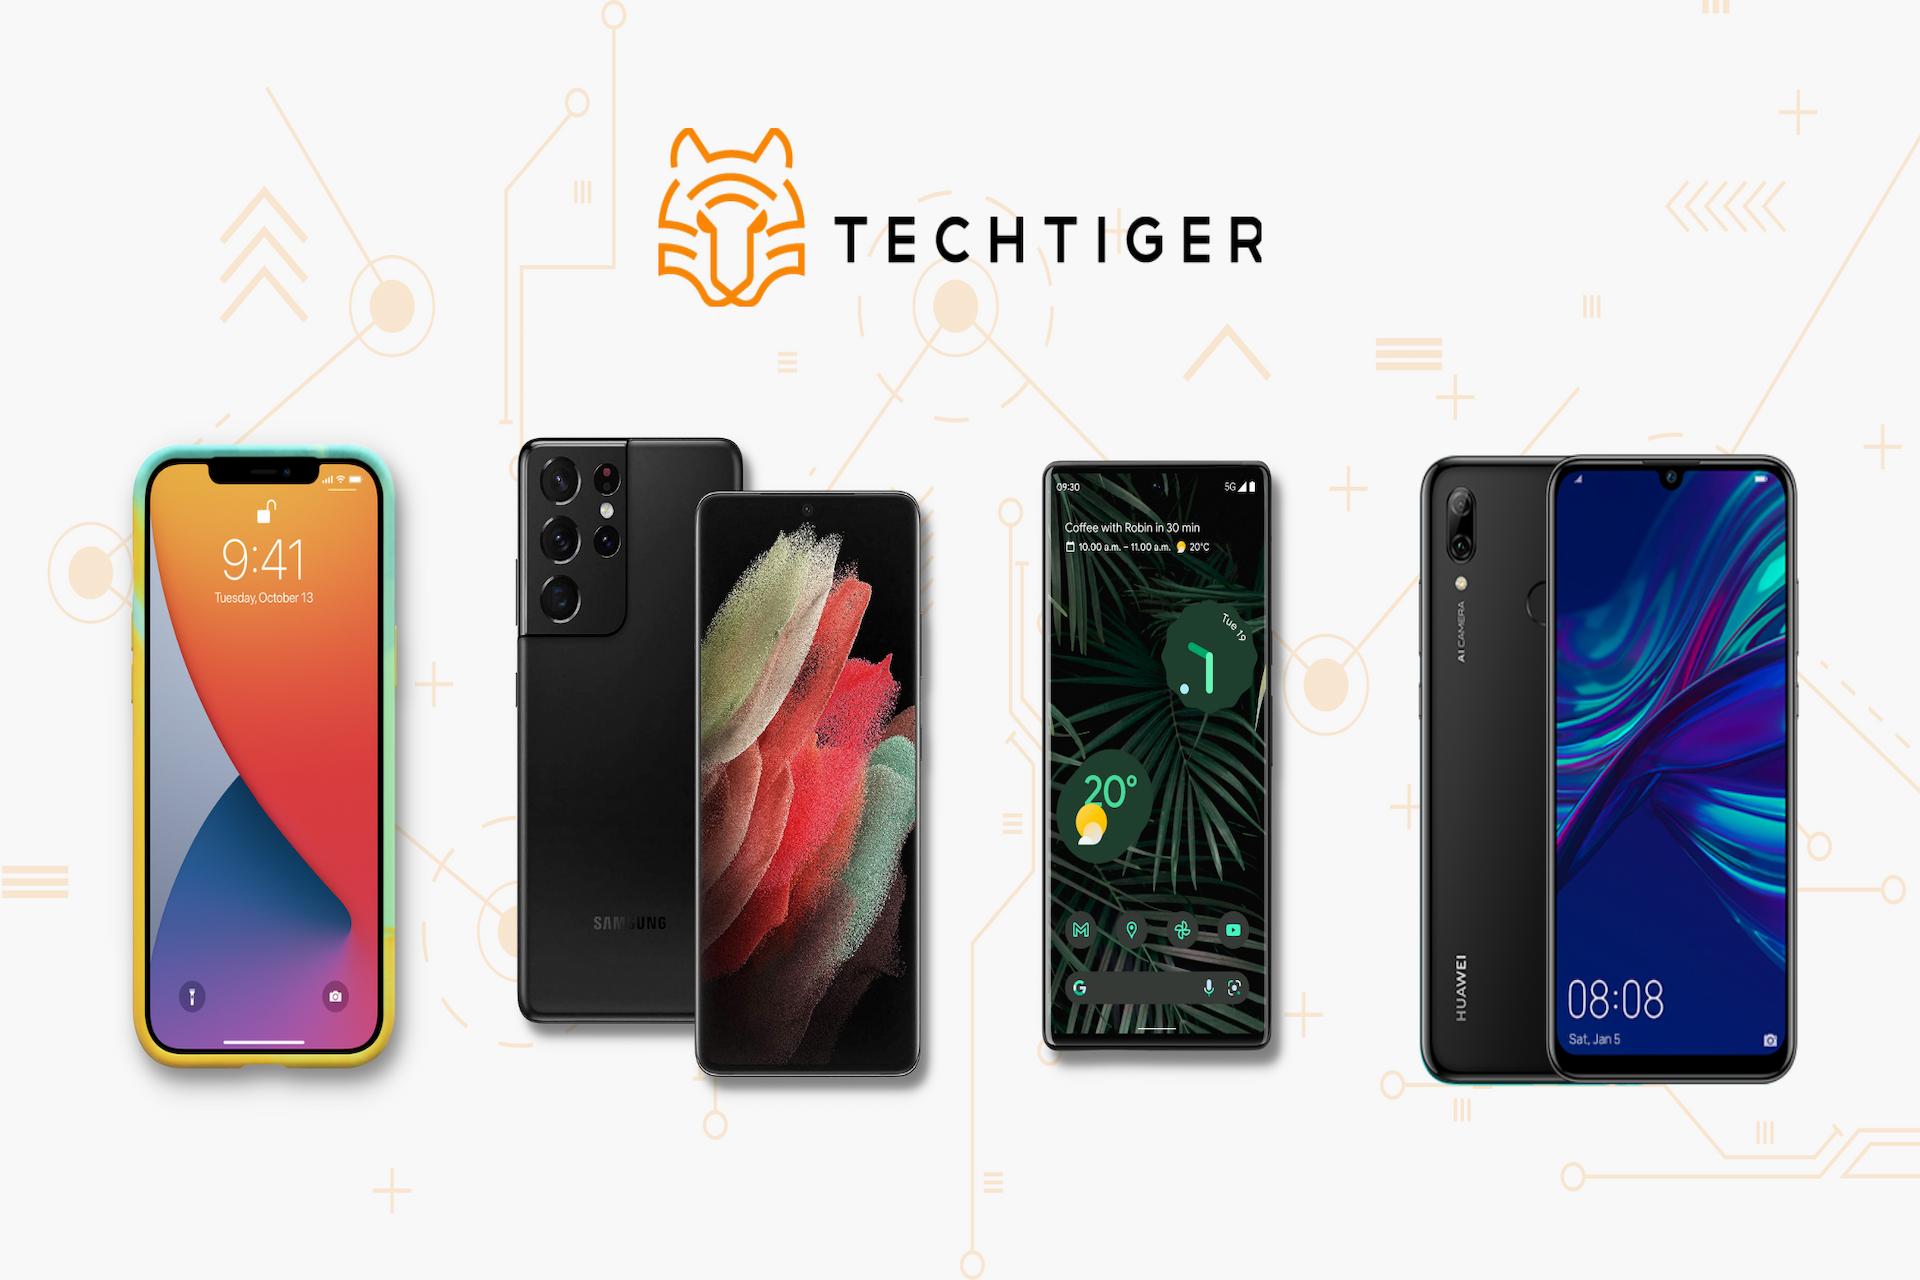 Tech Tiger: The Forward-Thinking Refurbished Technology Brand